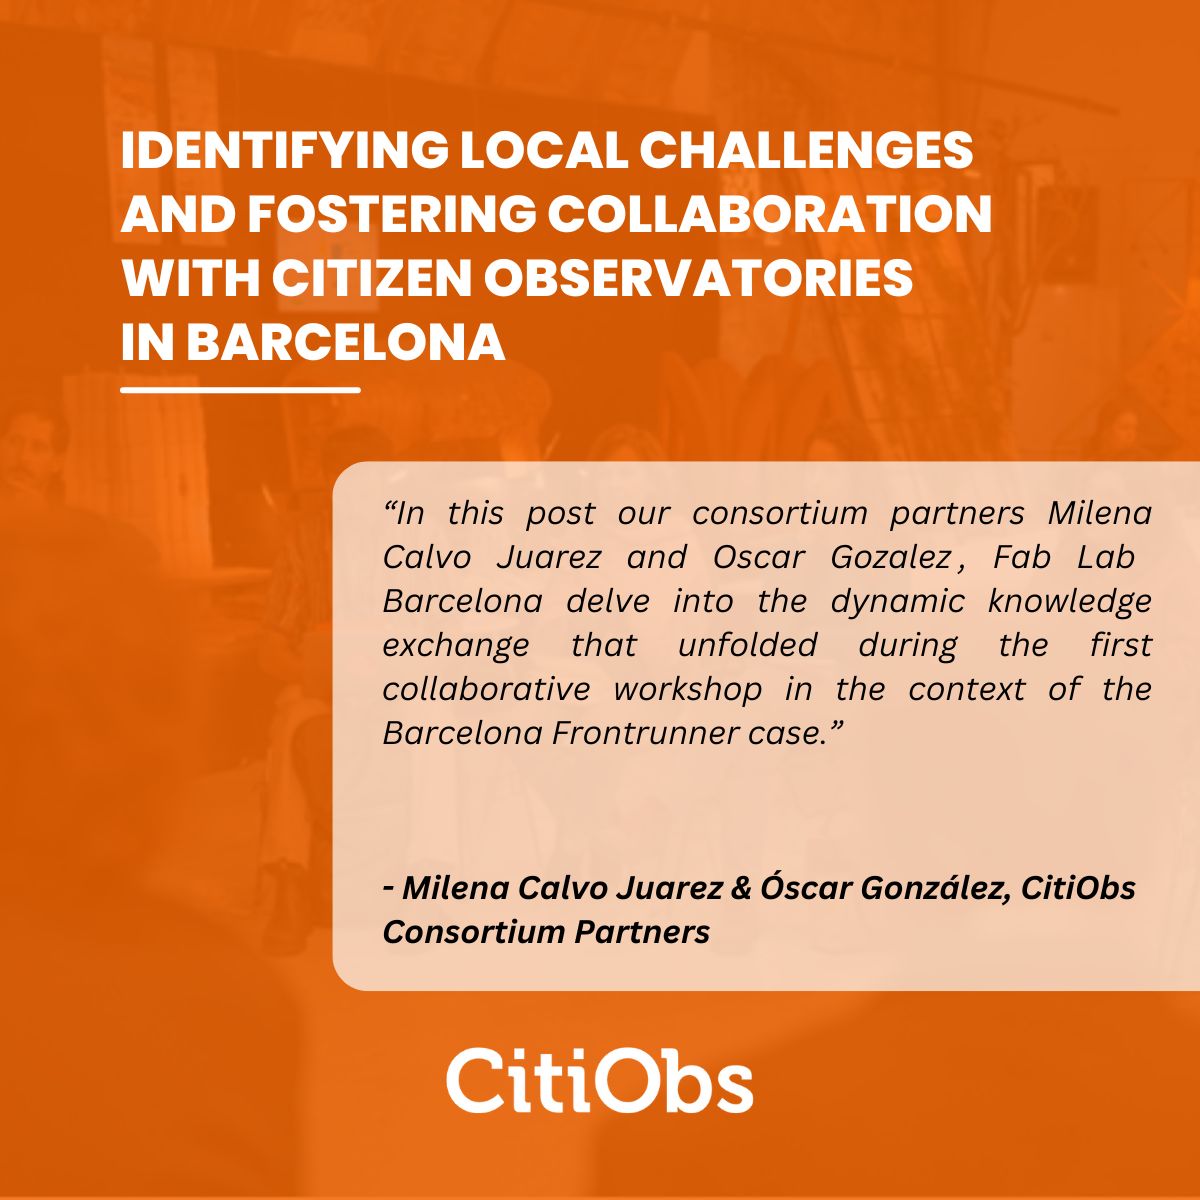 Exciting insights from our collaborative workshop in Barcelona by Milena Calvo Juarez & Oscar Gonzalez @fablabbcn! Read more: tinyurl.com/45ttaa75 #Frontrunners #MissionCities #CitizenObservatories #AirQuality As posted on mastodon.social/@citiobs